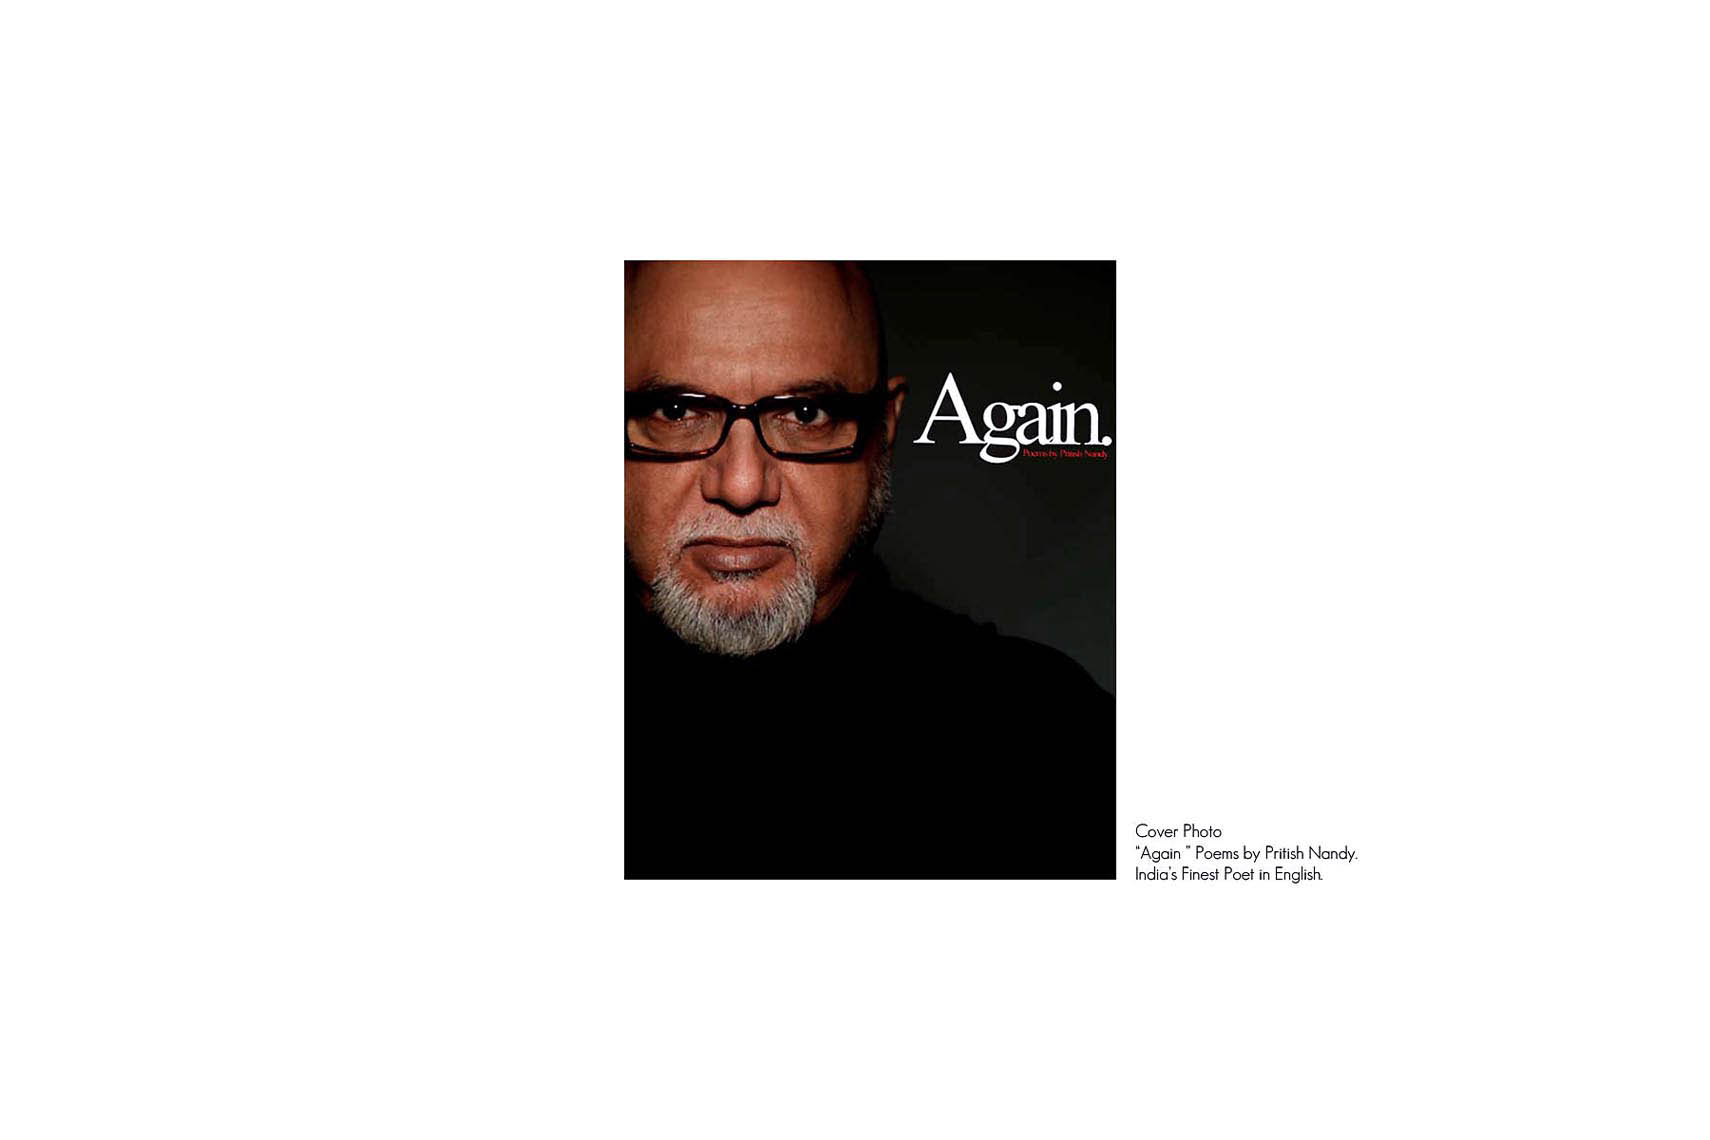 Best Editorial Photogrpher Vikram Bawa in India, Book Cover Shoot, "Again" Poems by Pritish Nandy, India Finest Poet in English, Best Fashion Photographer in Mumbai India